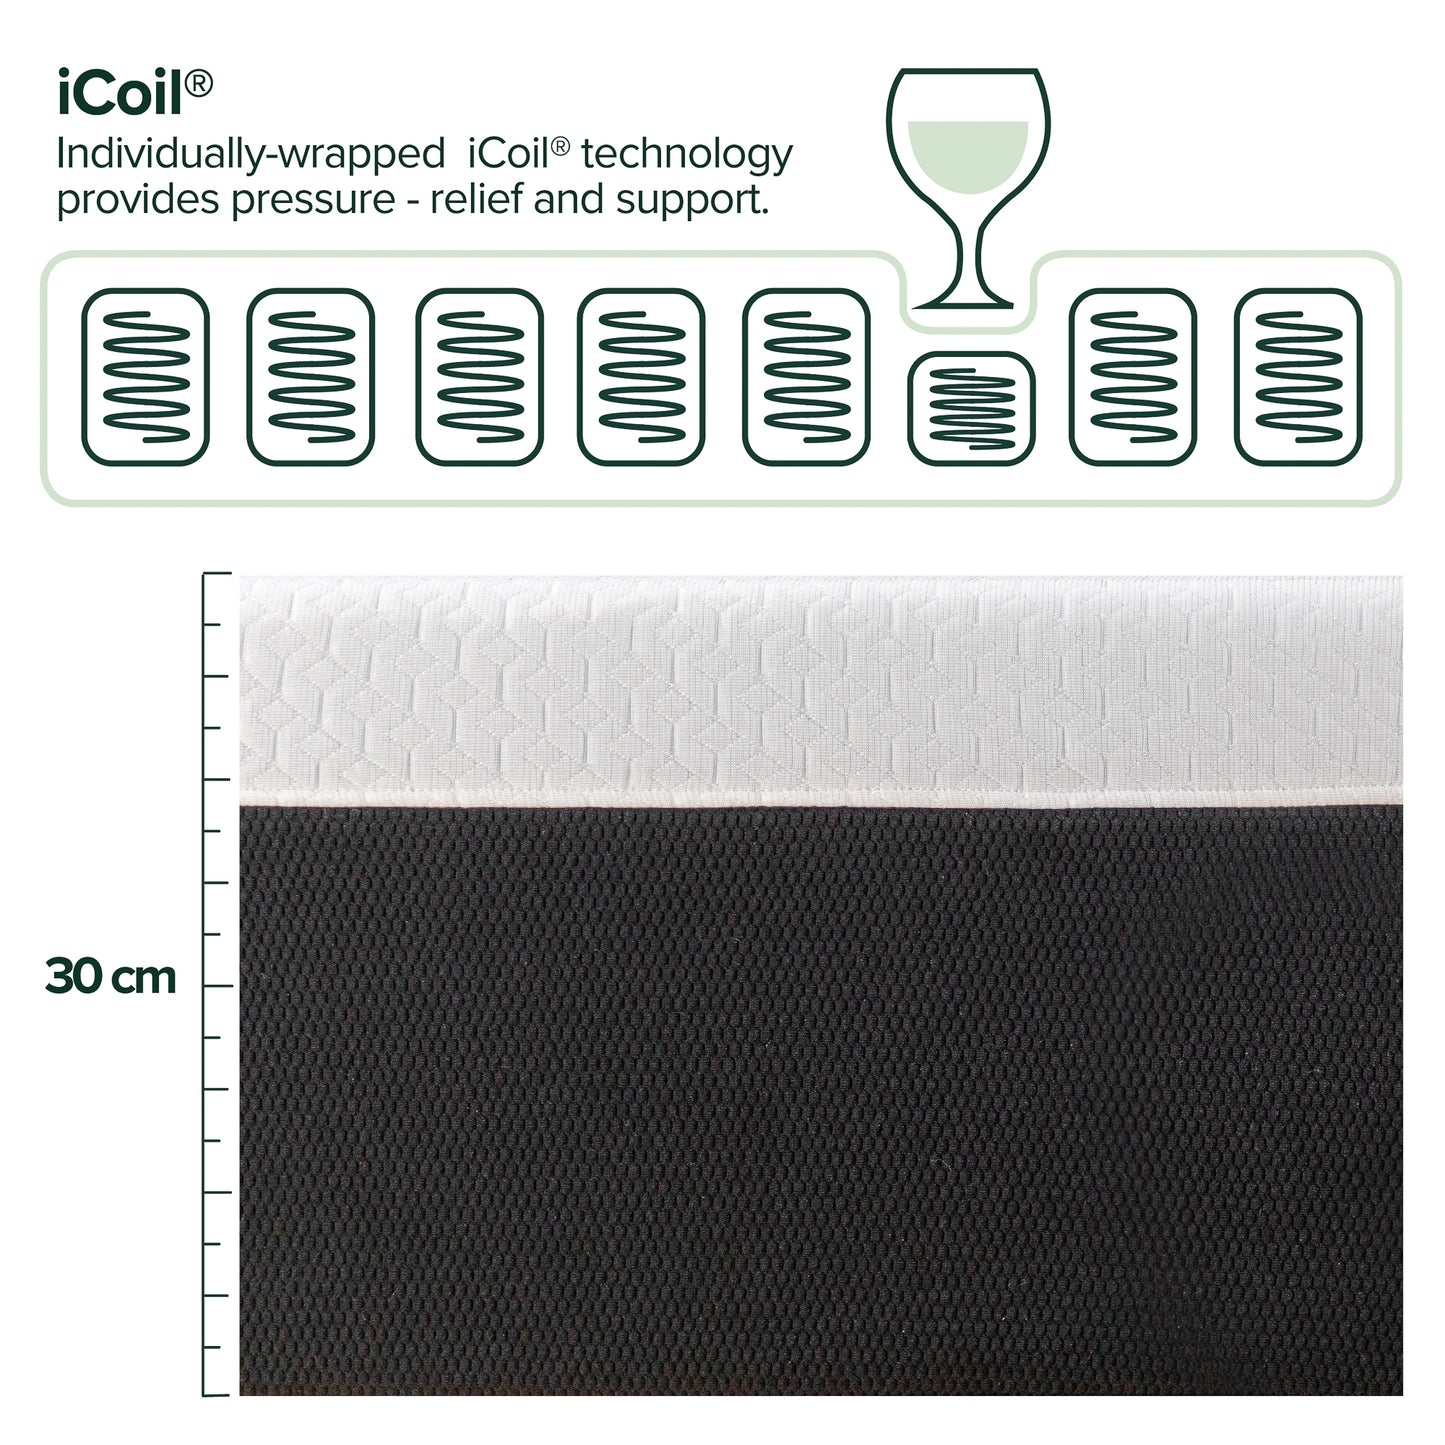 UltraCool Series iCoil 2.0 Natural Latex Smooth Top Mattress With Edge Support (Cool Fabric) 12"